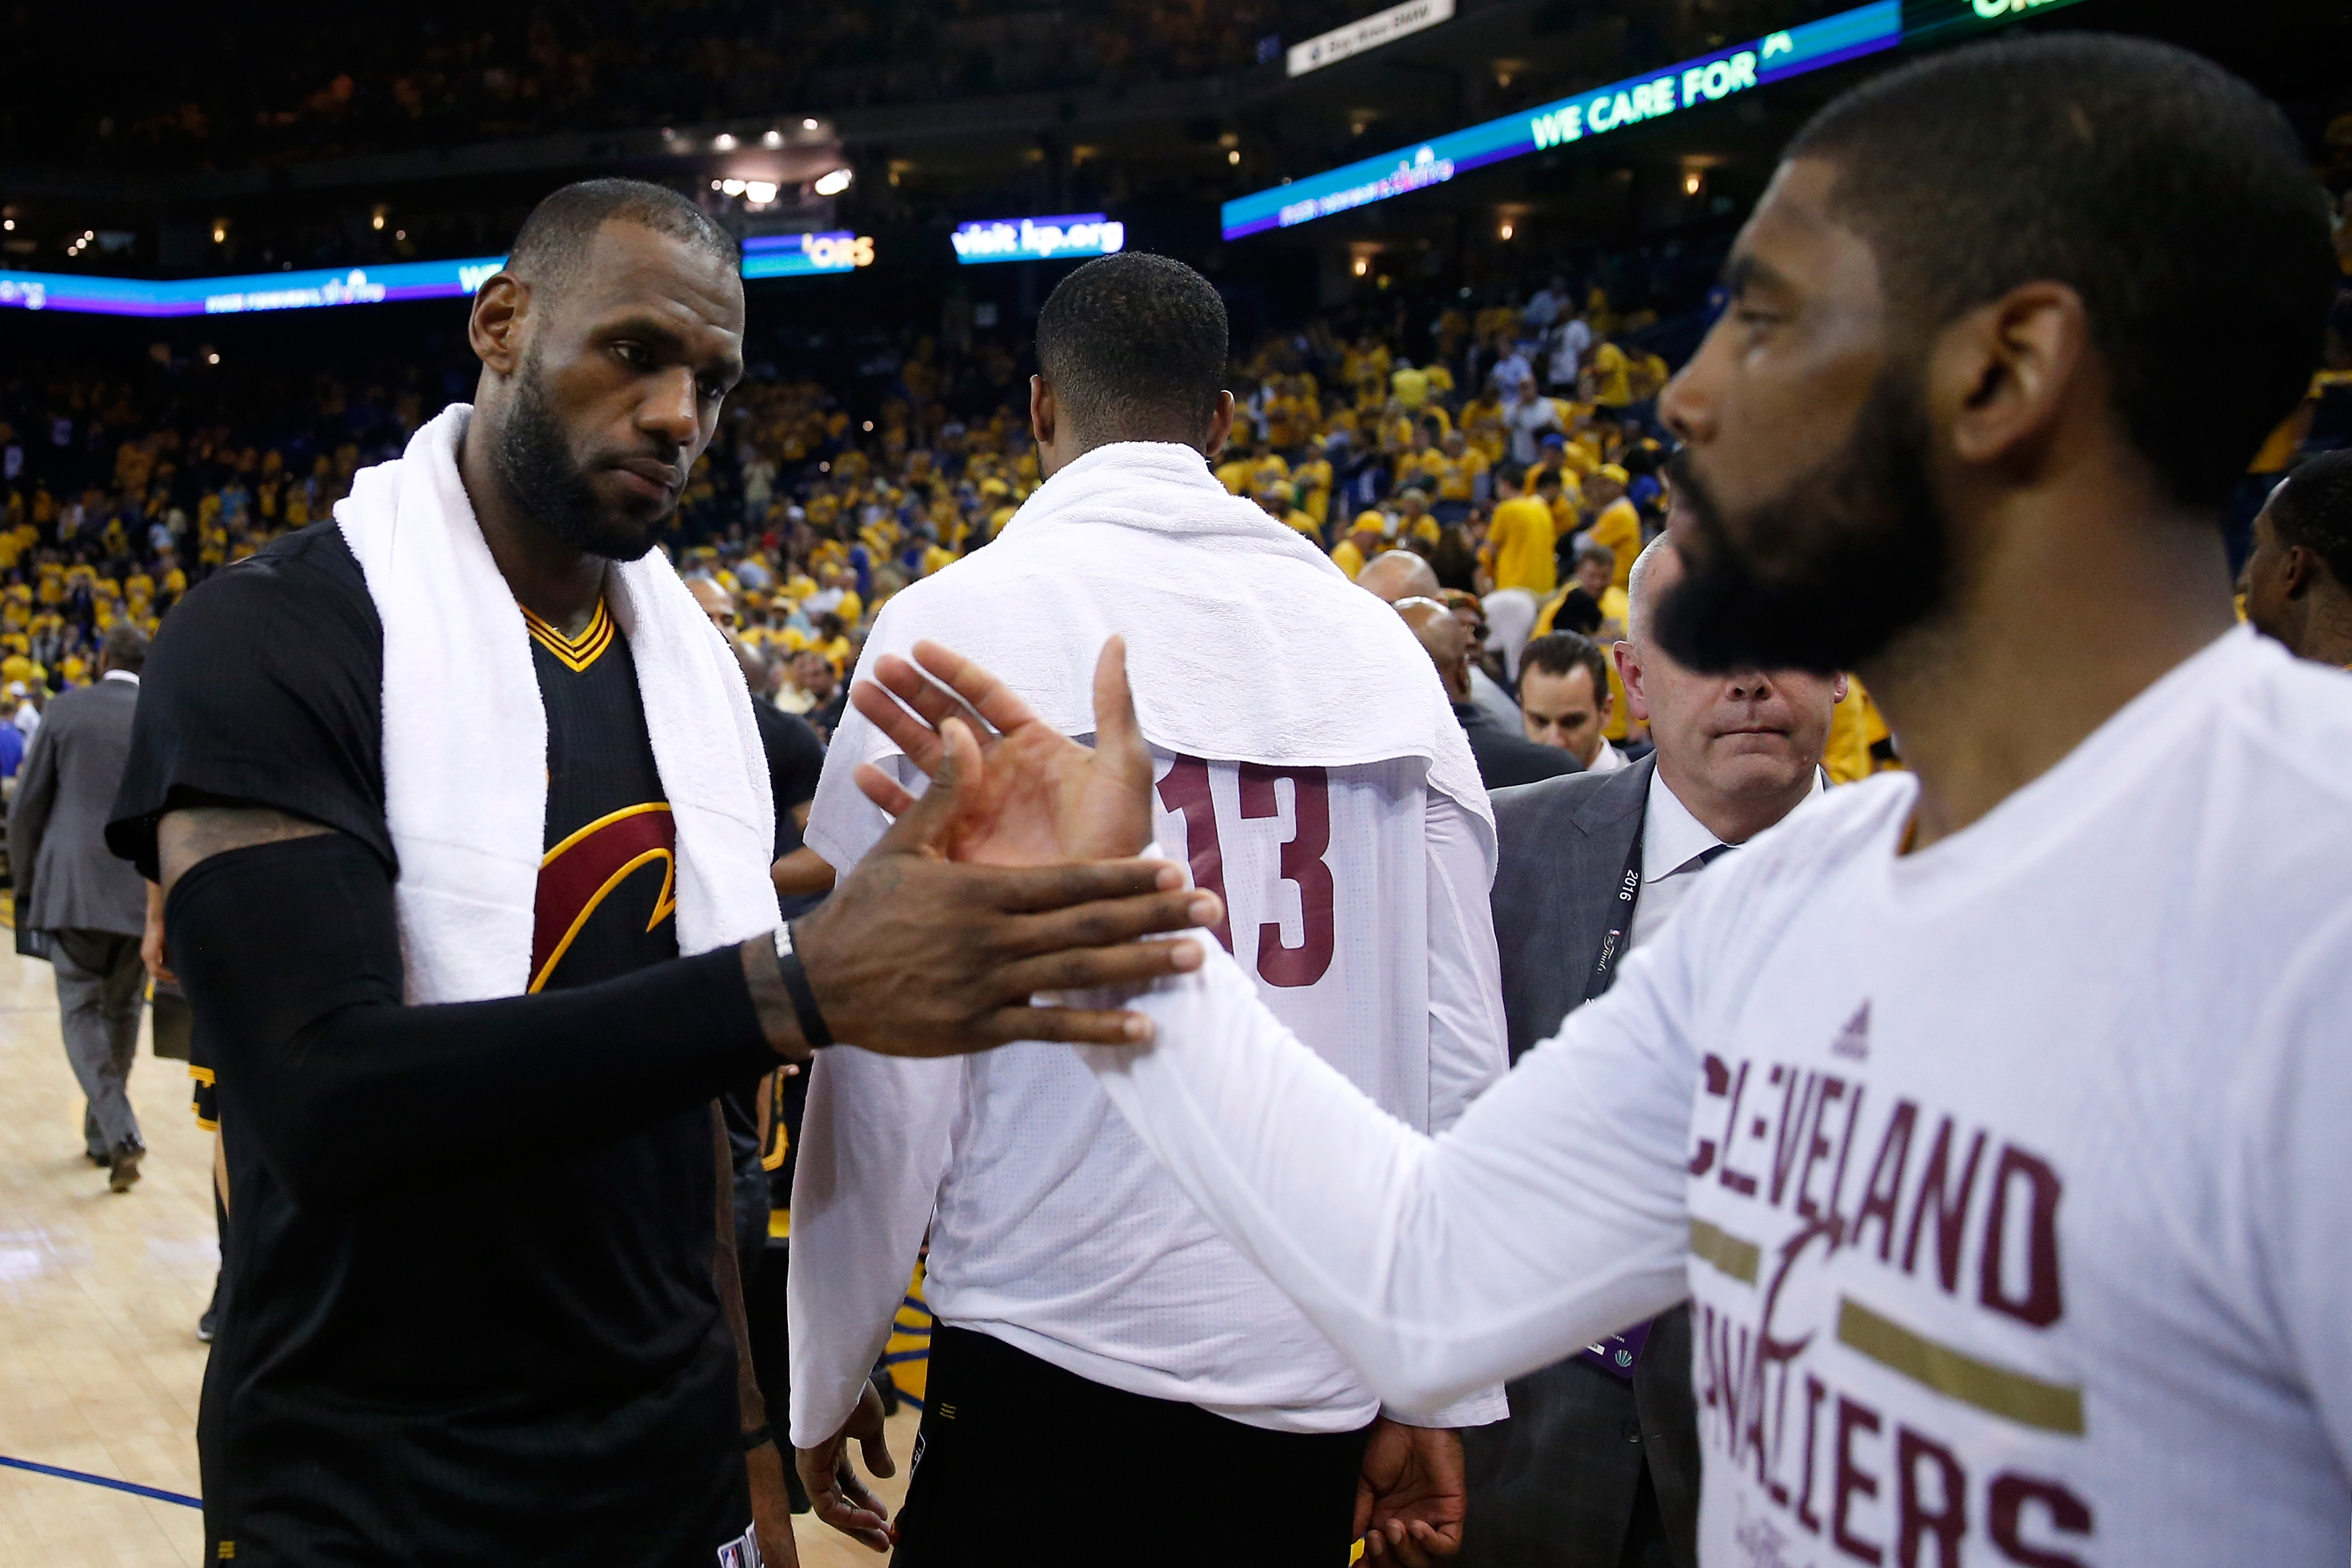 Timeline of How the CLEVELAND CAVALIERS Lost LEBRON JAMES